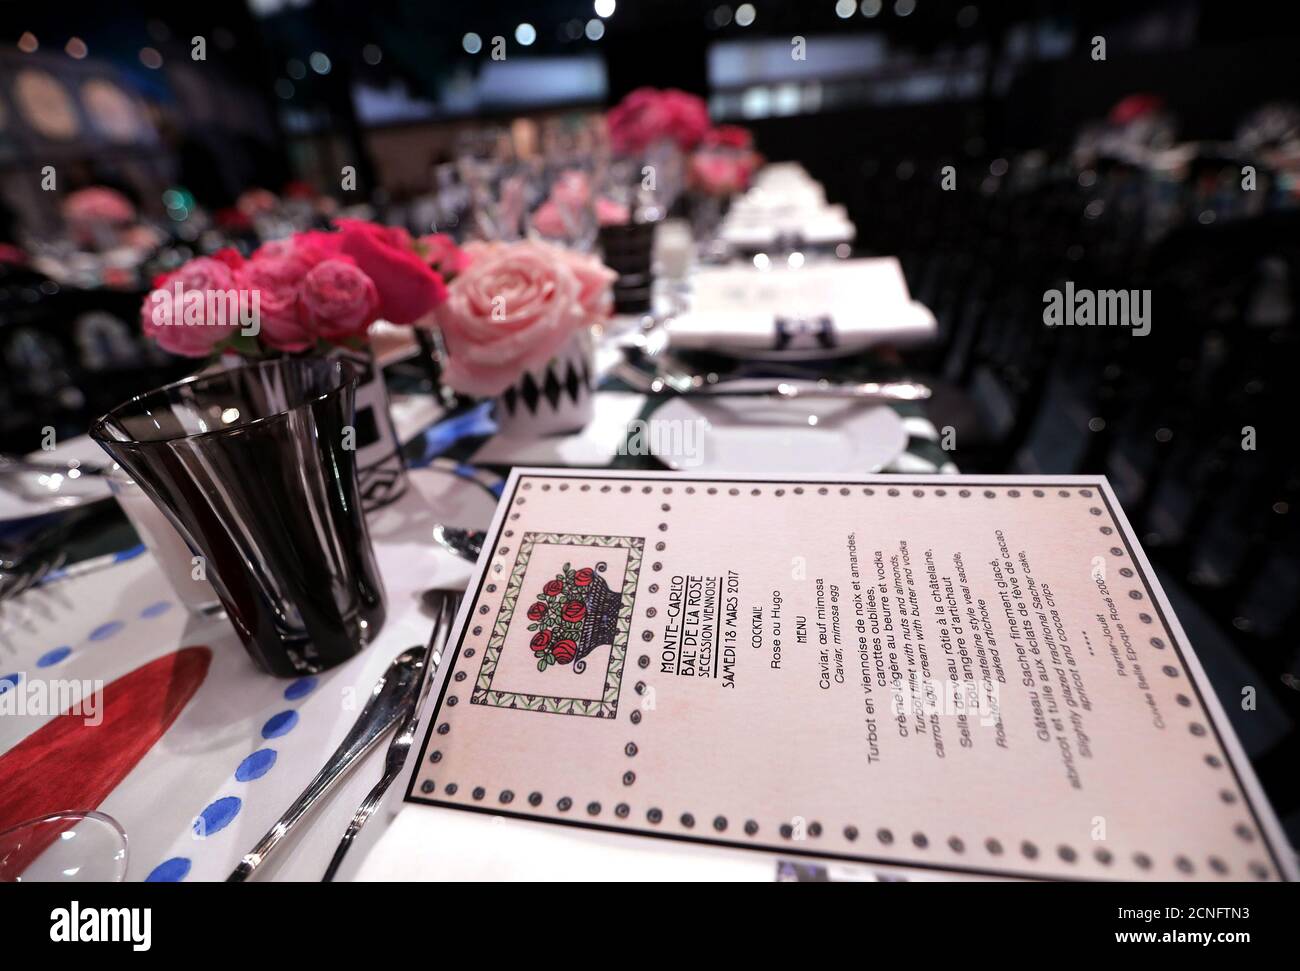 A view of the table decorations in the "Salle Des Etoiles" (Stars Room) at  the Monte Carlo Sporting during the Bal de la Rose event in Monaco March  18, 2017. REUTERS/Eric Gaillard